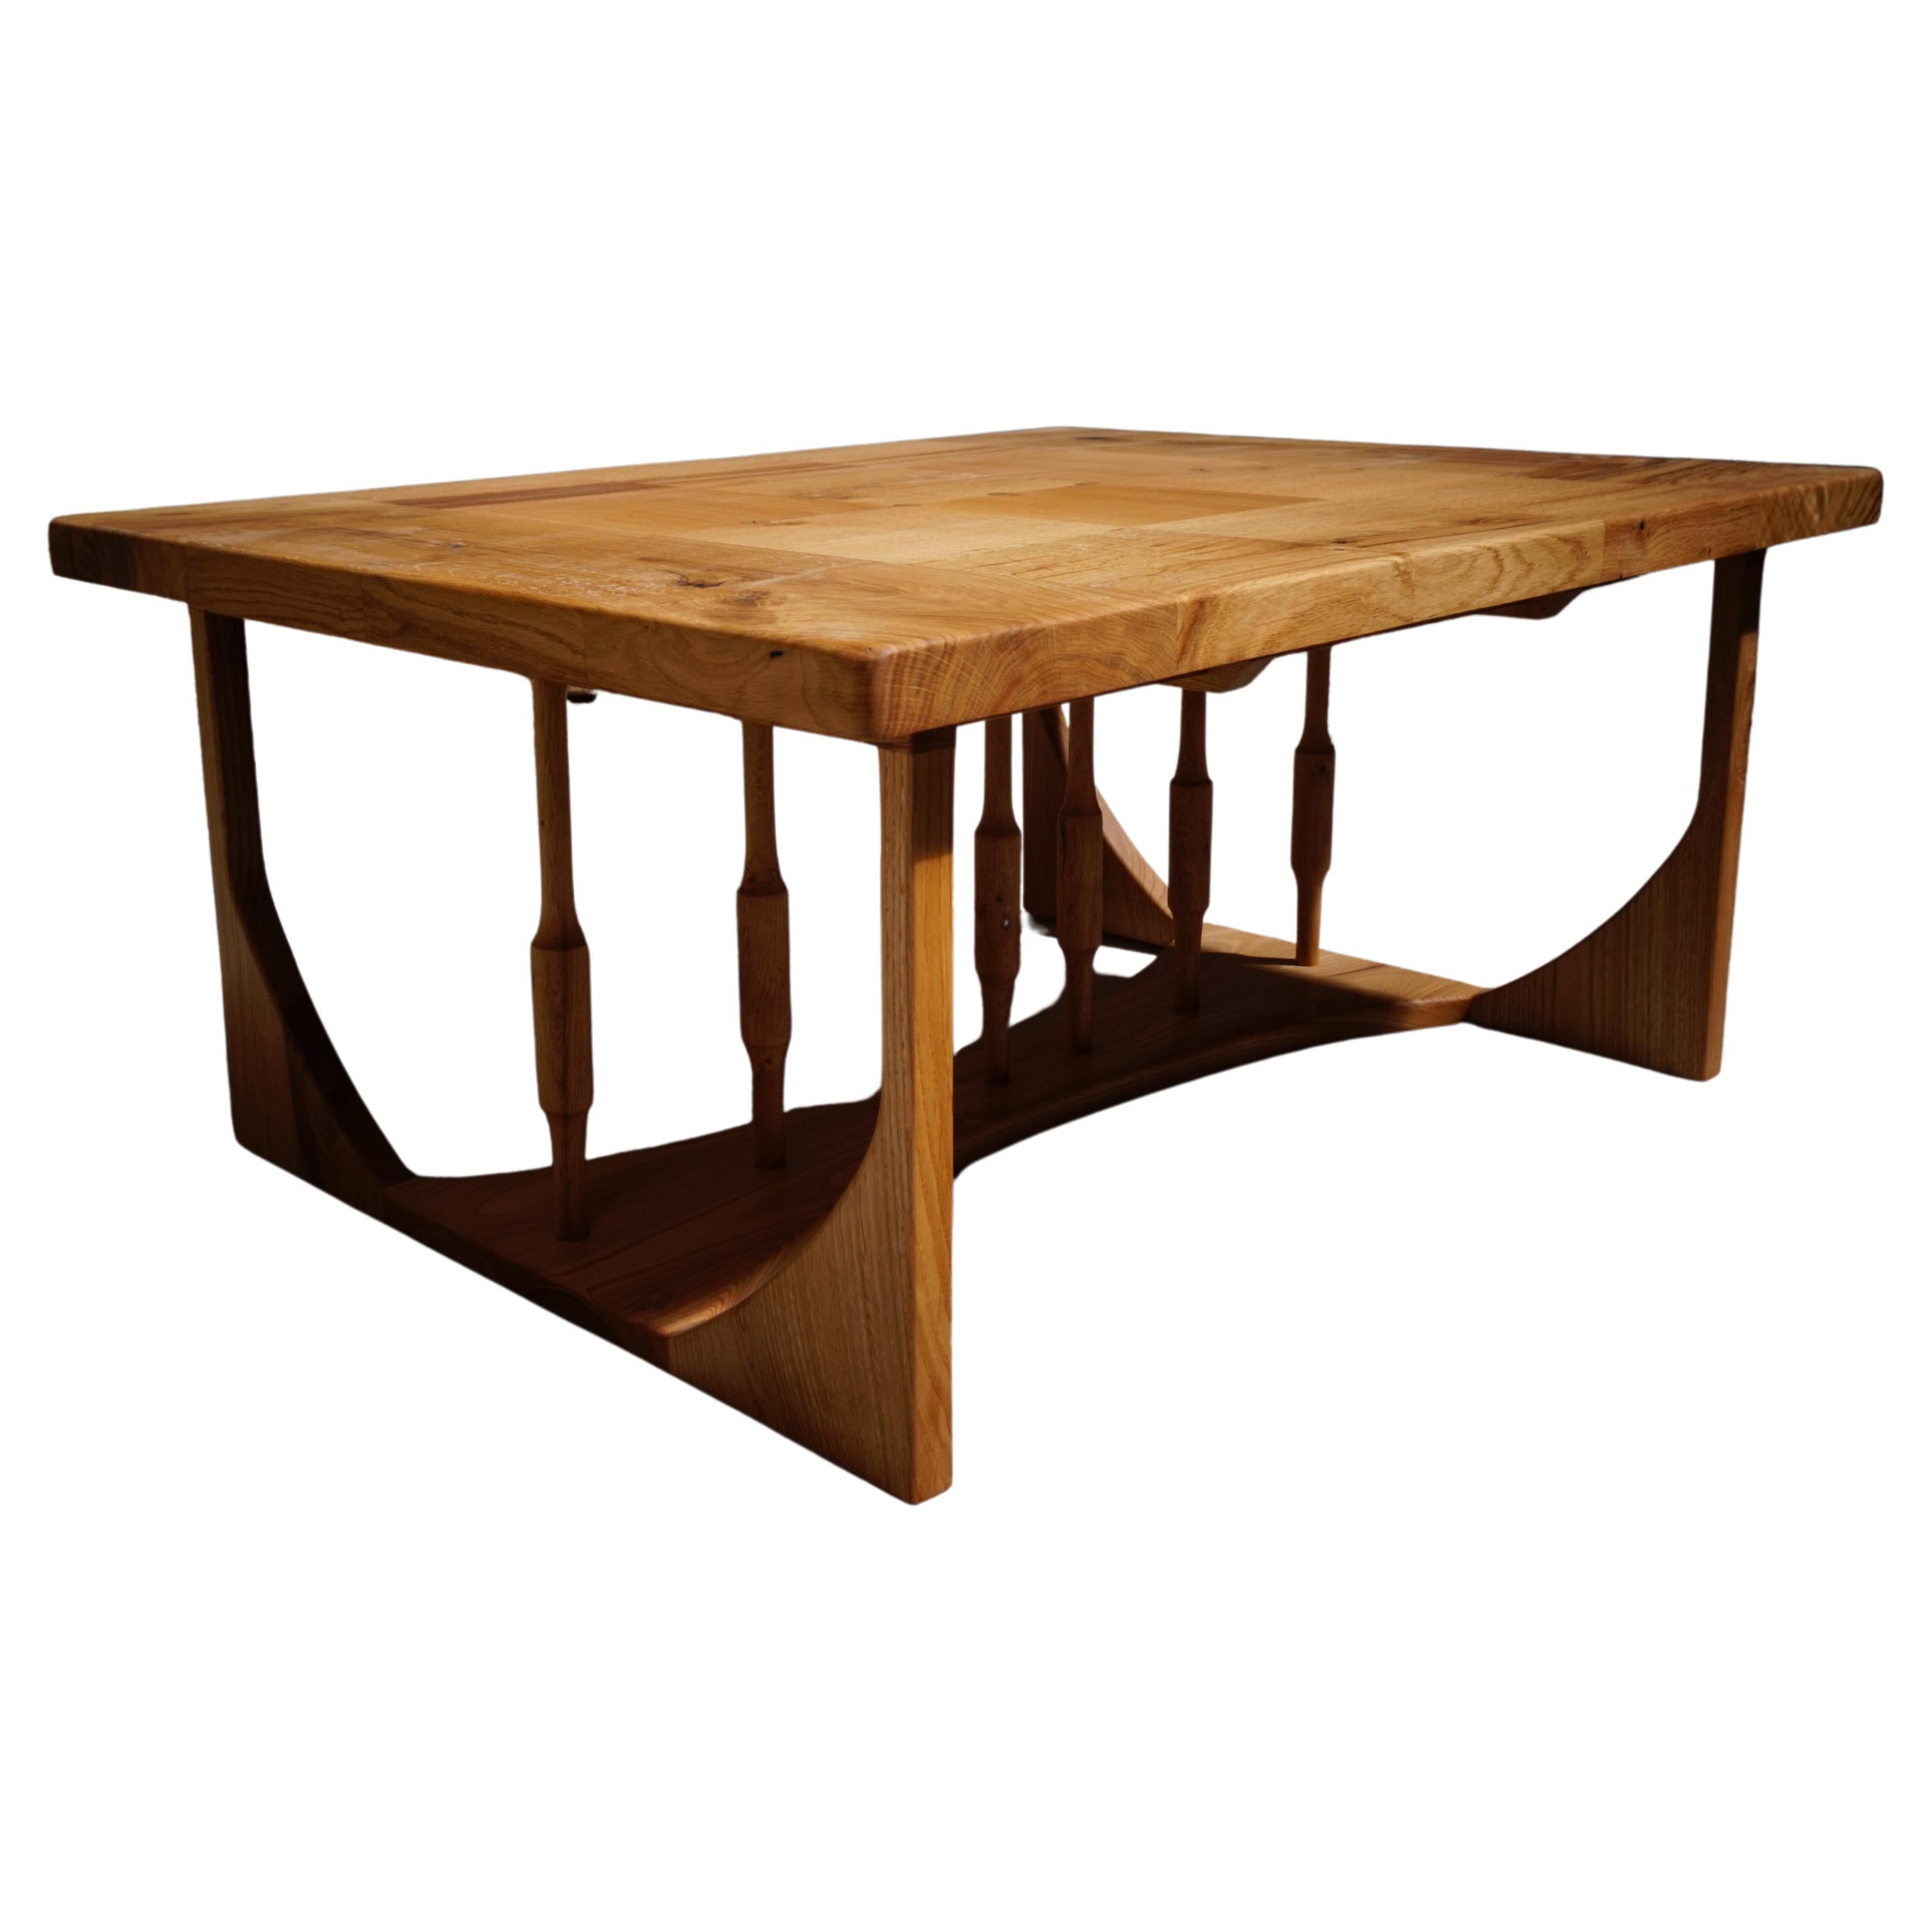 A rectangular coffee table hand made from beautiful French Oak. The table top is made from square tiles orientated with a flowing grain pattern. Vertical spindles add a touch of drama underneath and provide a structural component. Designed to